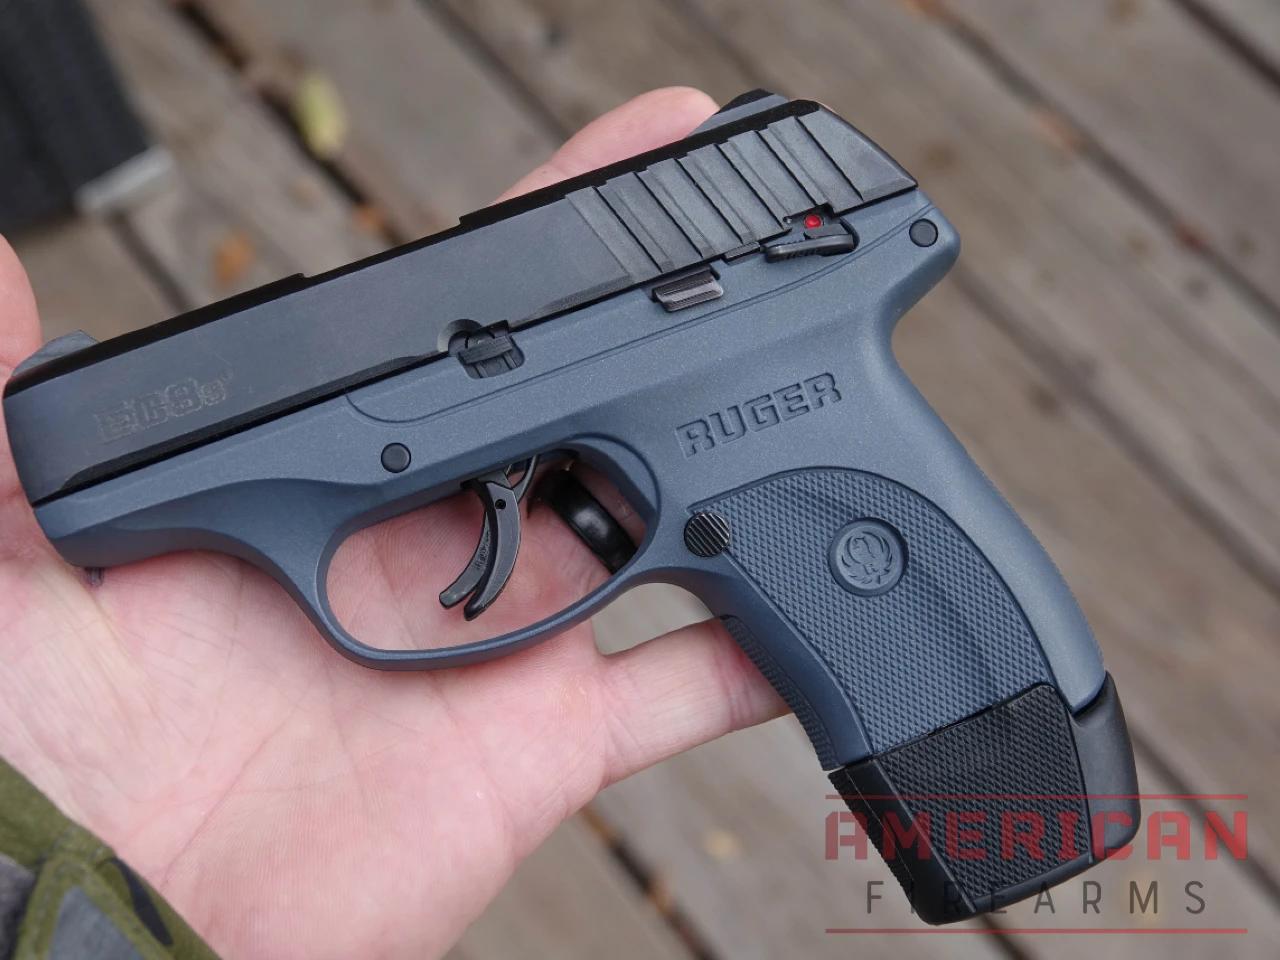 The extended mag adds a touch of additional grip space, which helps establish a firm grip on the snappy EC9s.